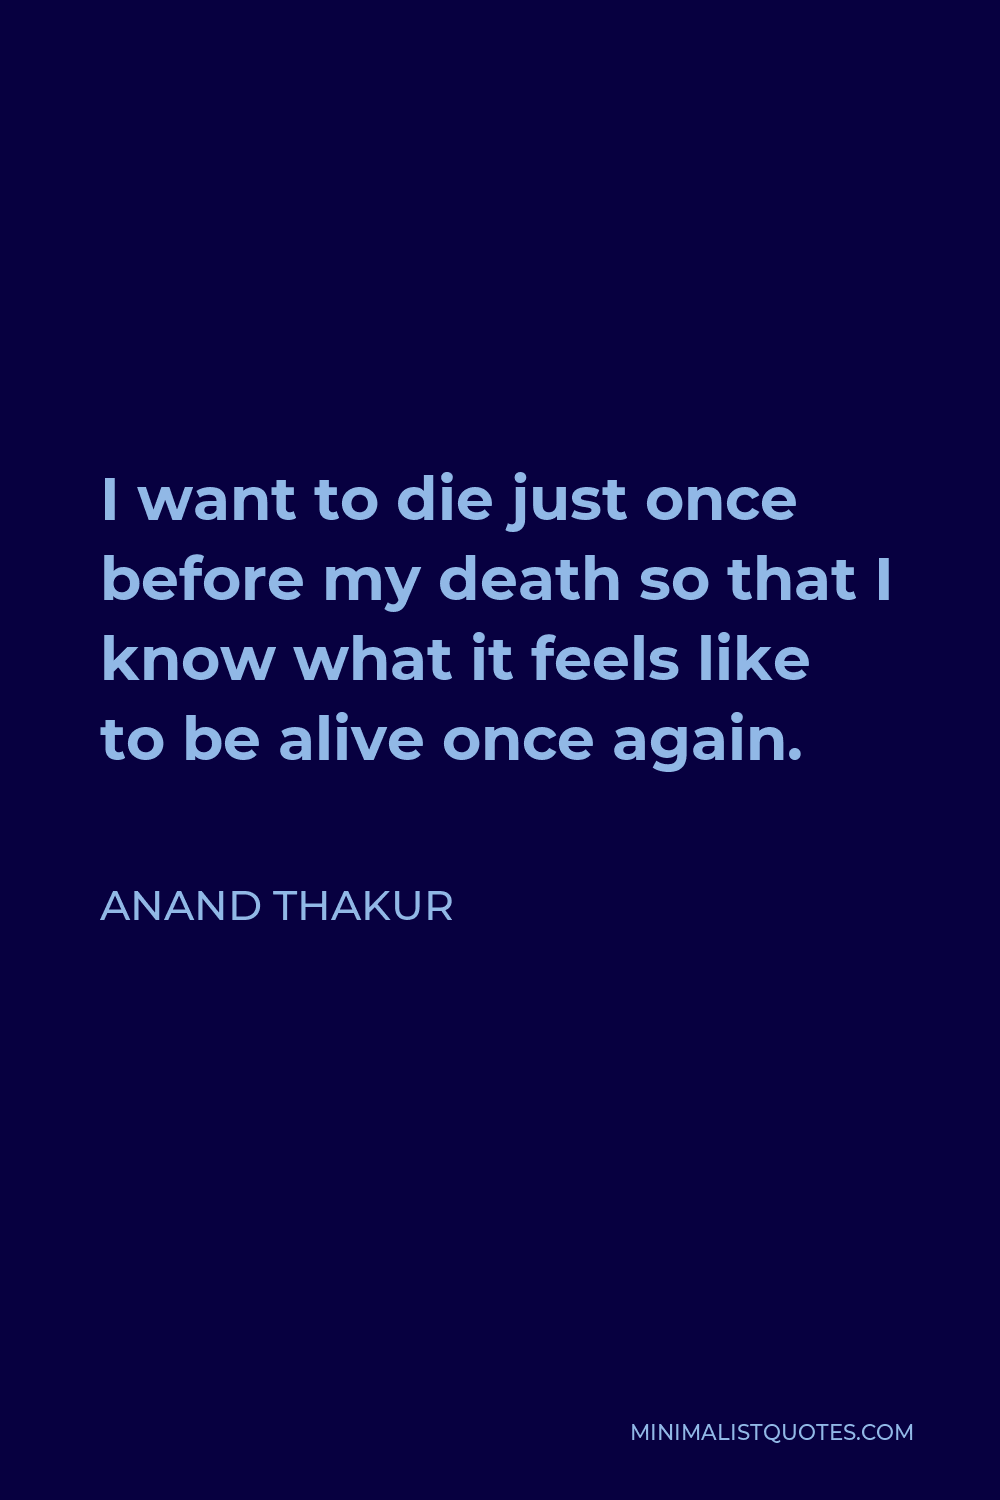 Anand Thakur Quote: I want to die just once before my death so that I ...